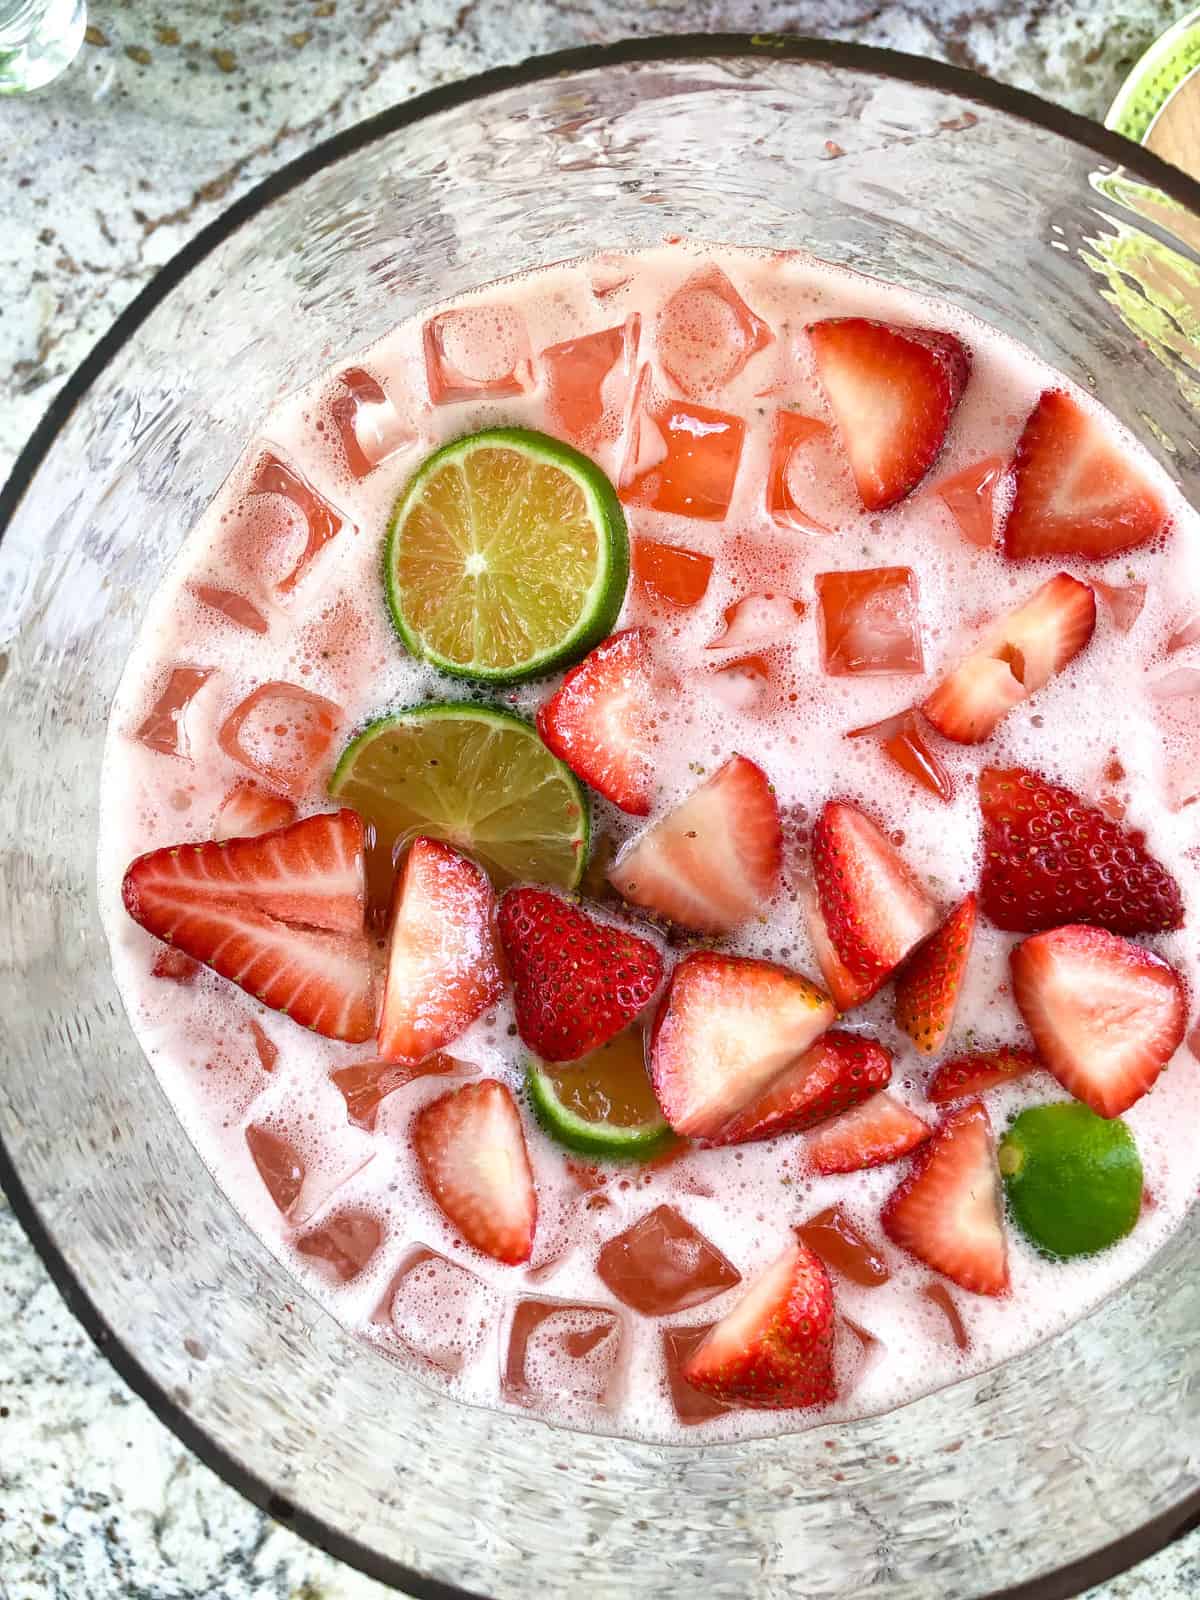 Top it with sliced strawberries and limes, and serve!